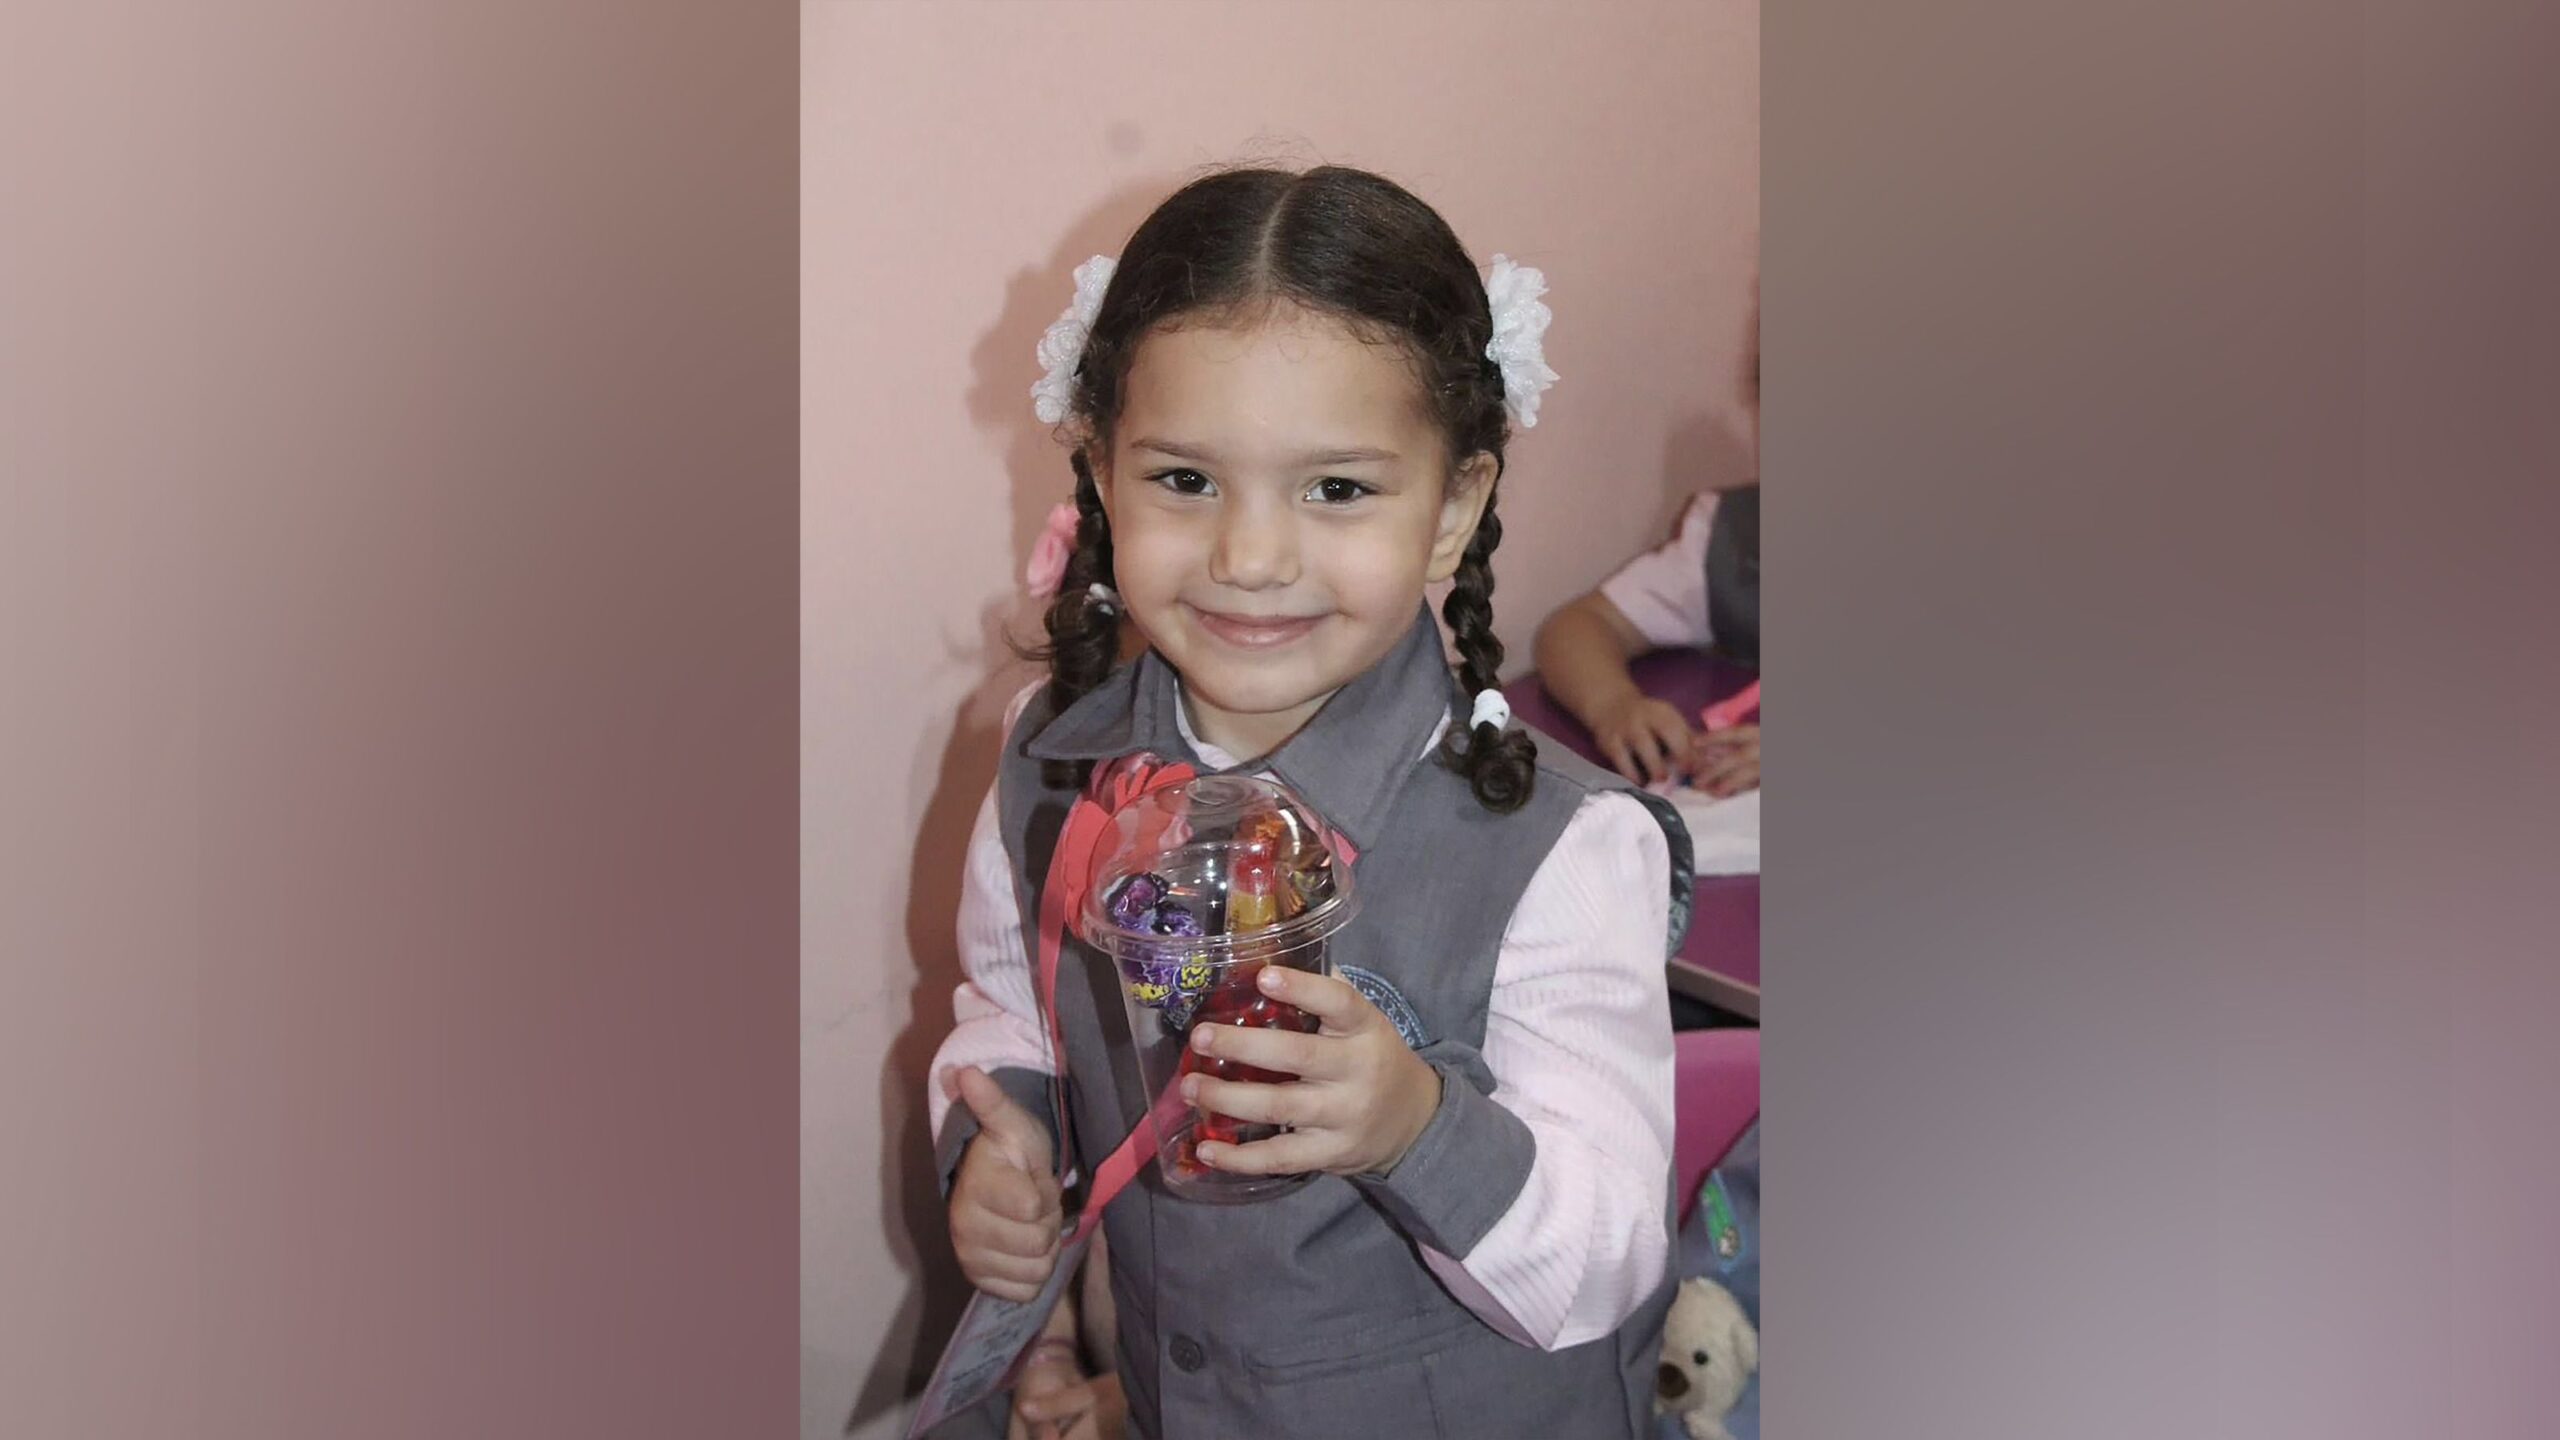 Five-year-old Palestinian girl found dead after being trapped in car under Israeli fire [Video]